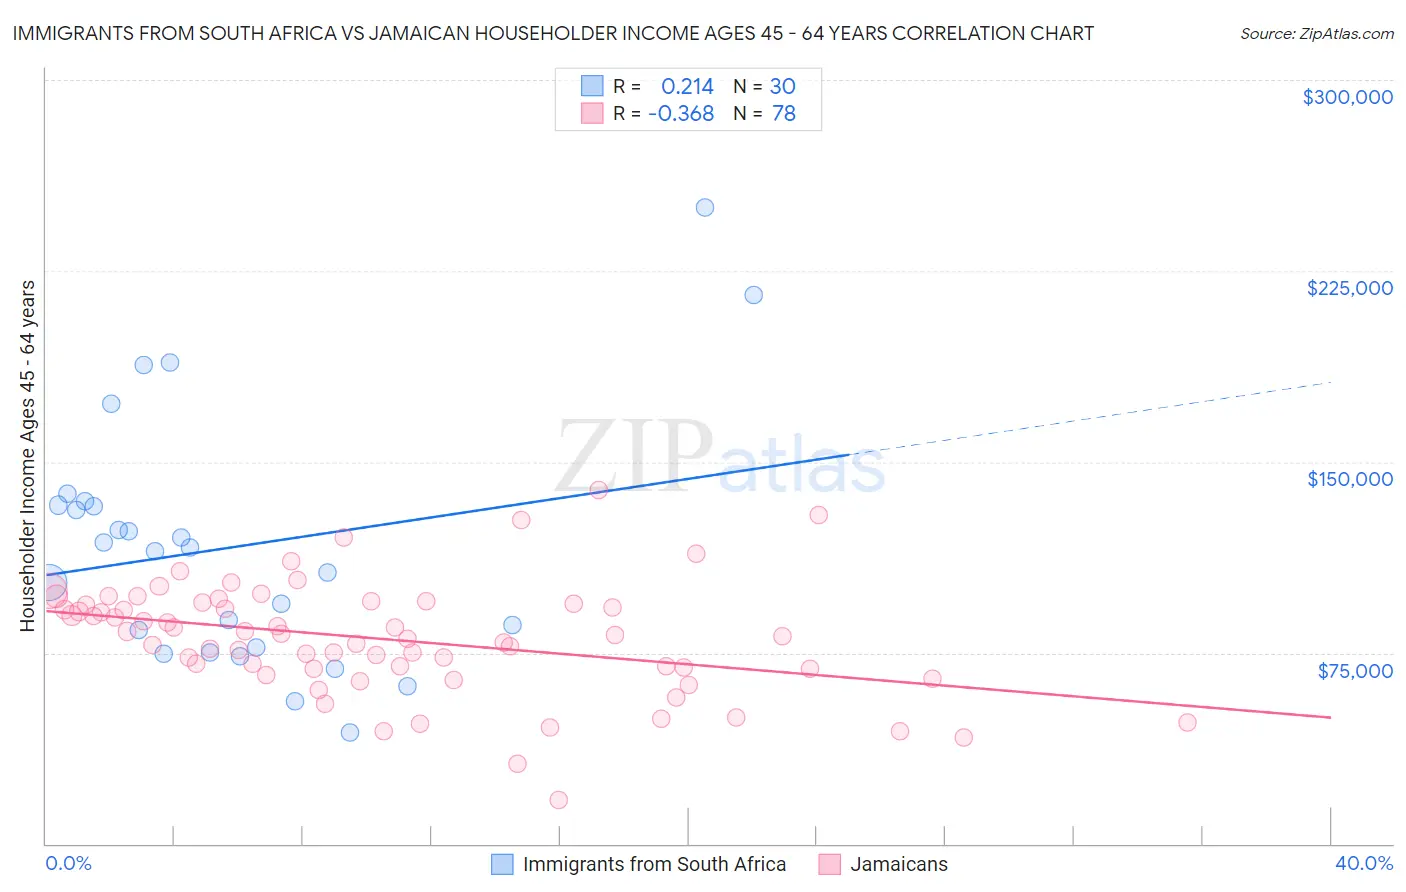 Immigrants from South Africa vs Jamaican Householder Income Ages 45 - 64 years